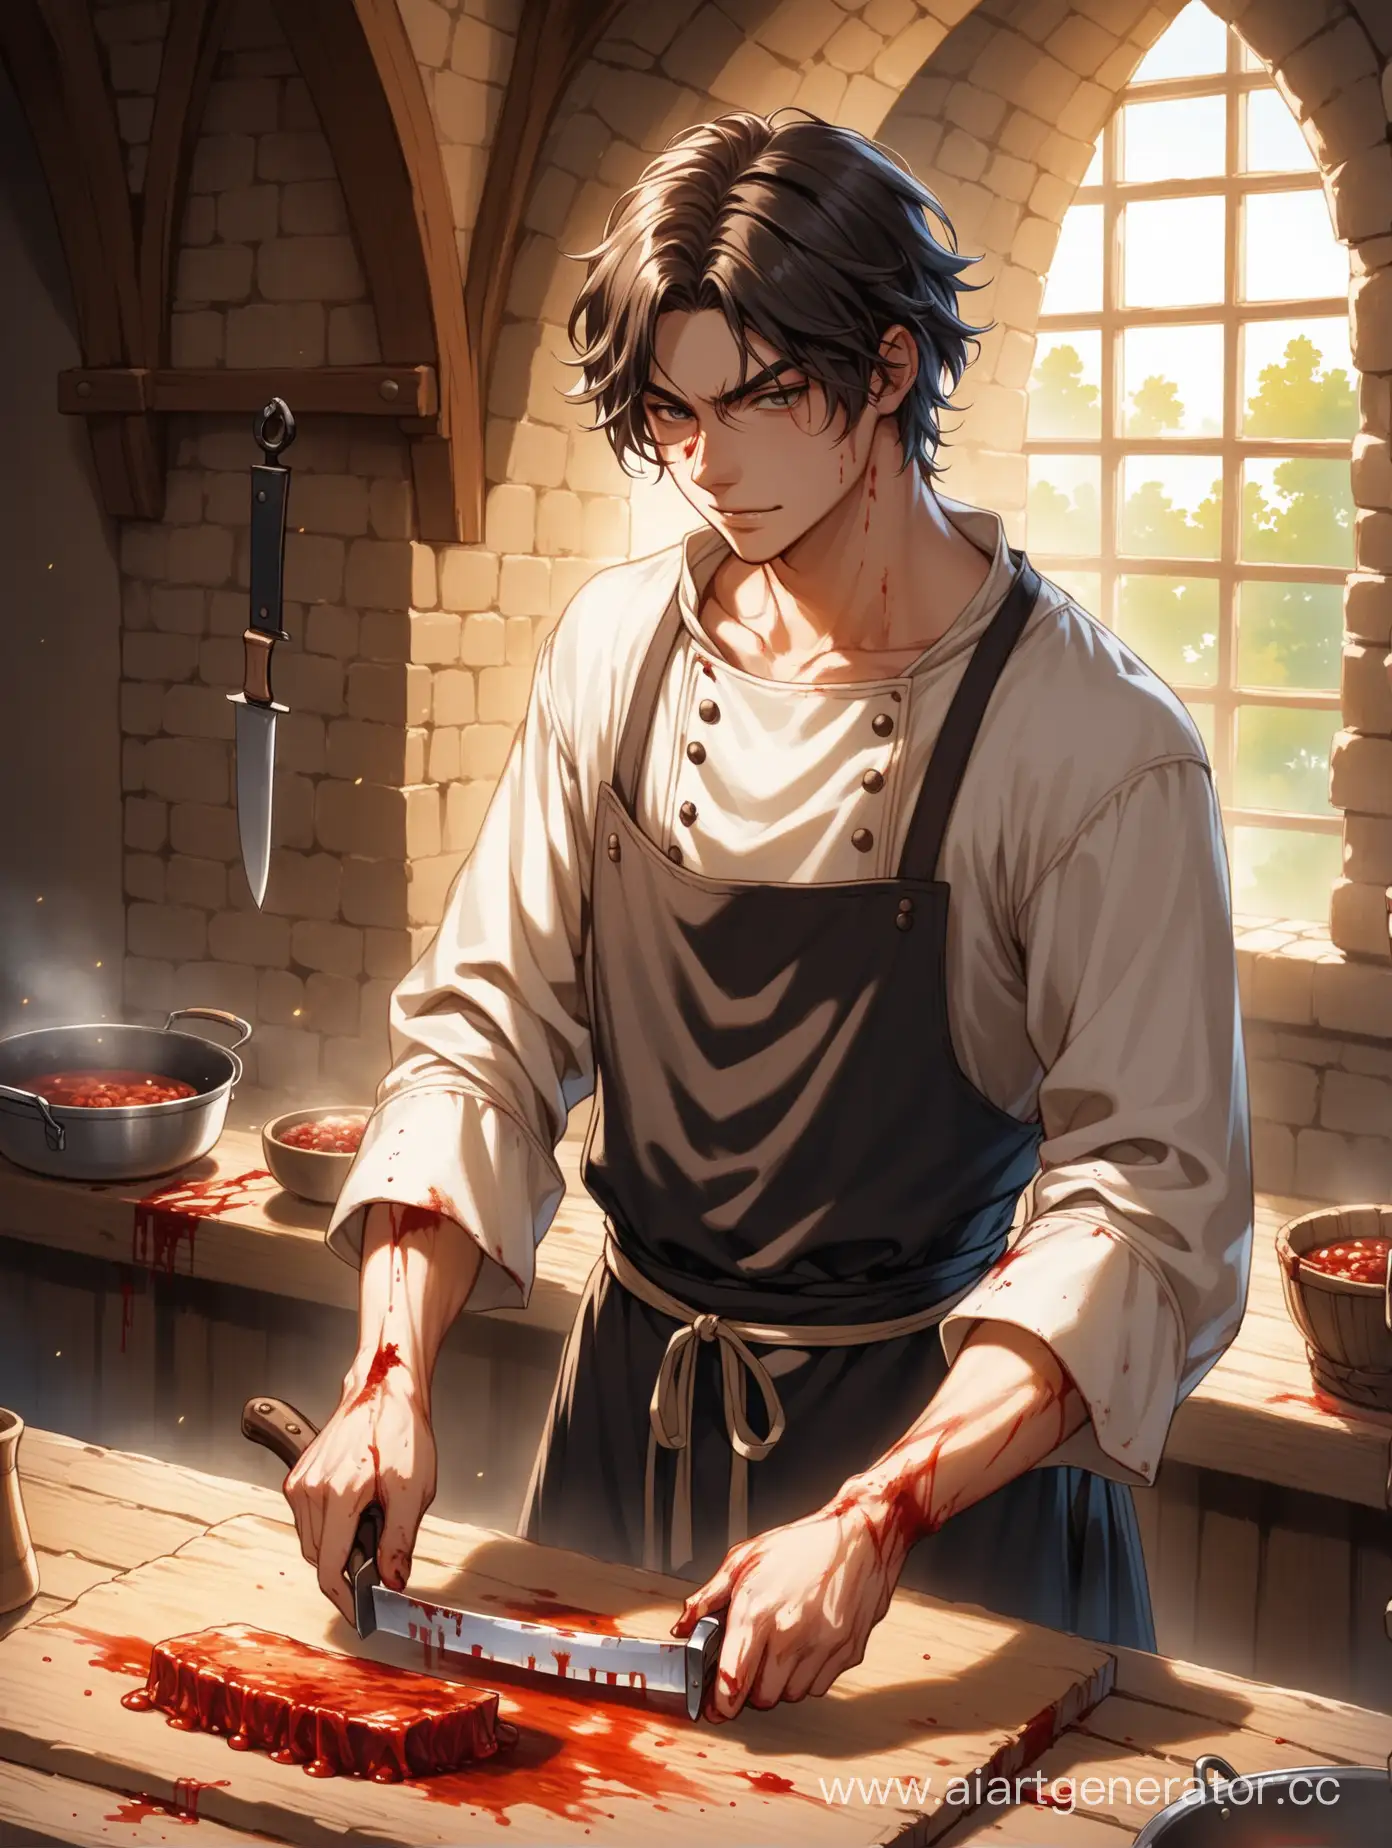 Medieval-Cook-Holding-Bloodied-Knife